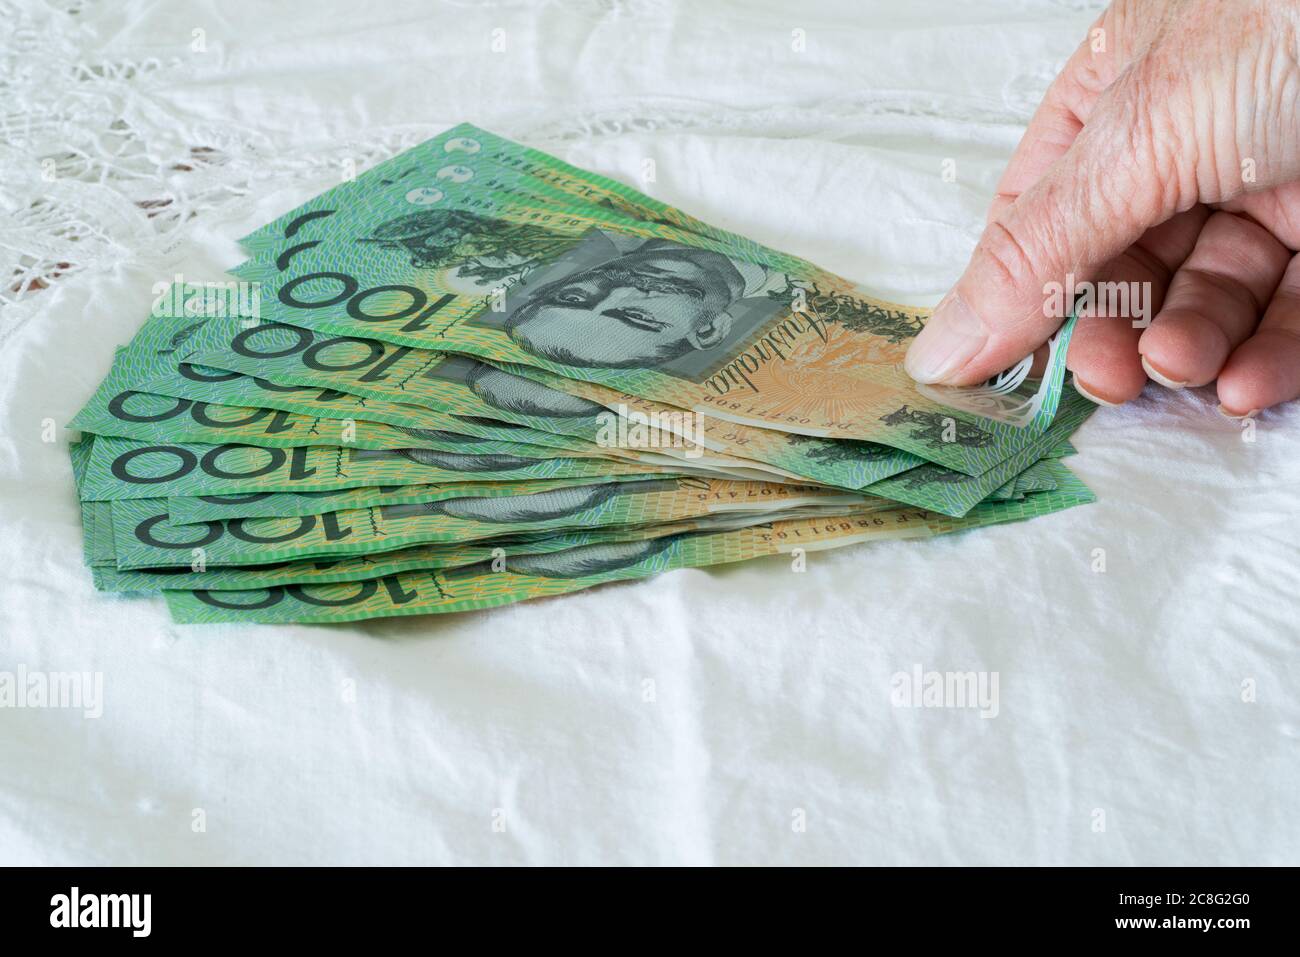 Person placing and counting money, one hundred dollar notes, Australian currency Stock Photo